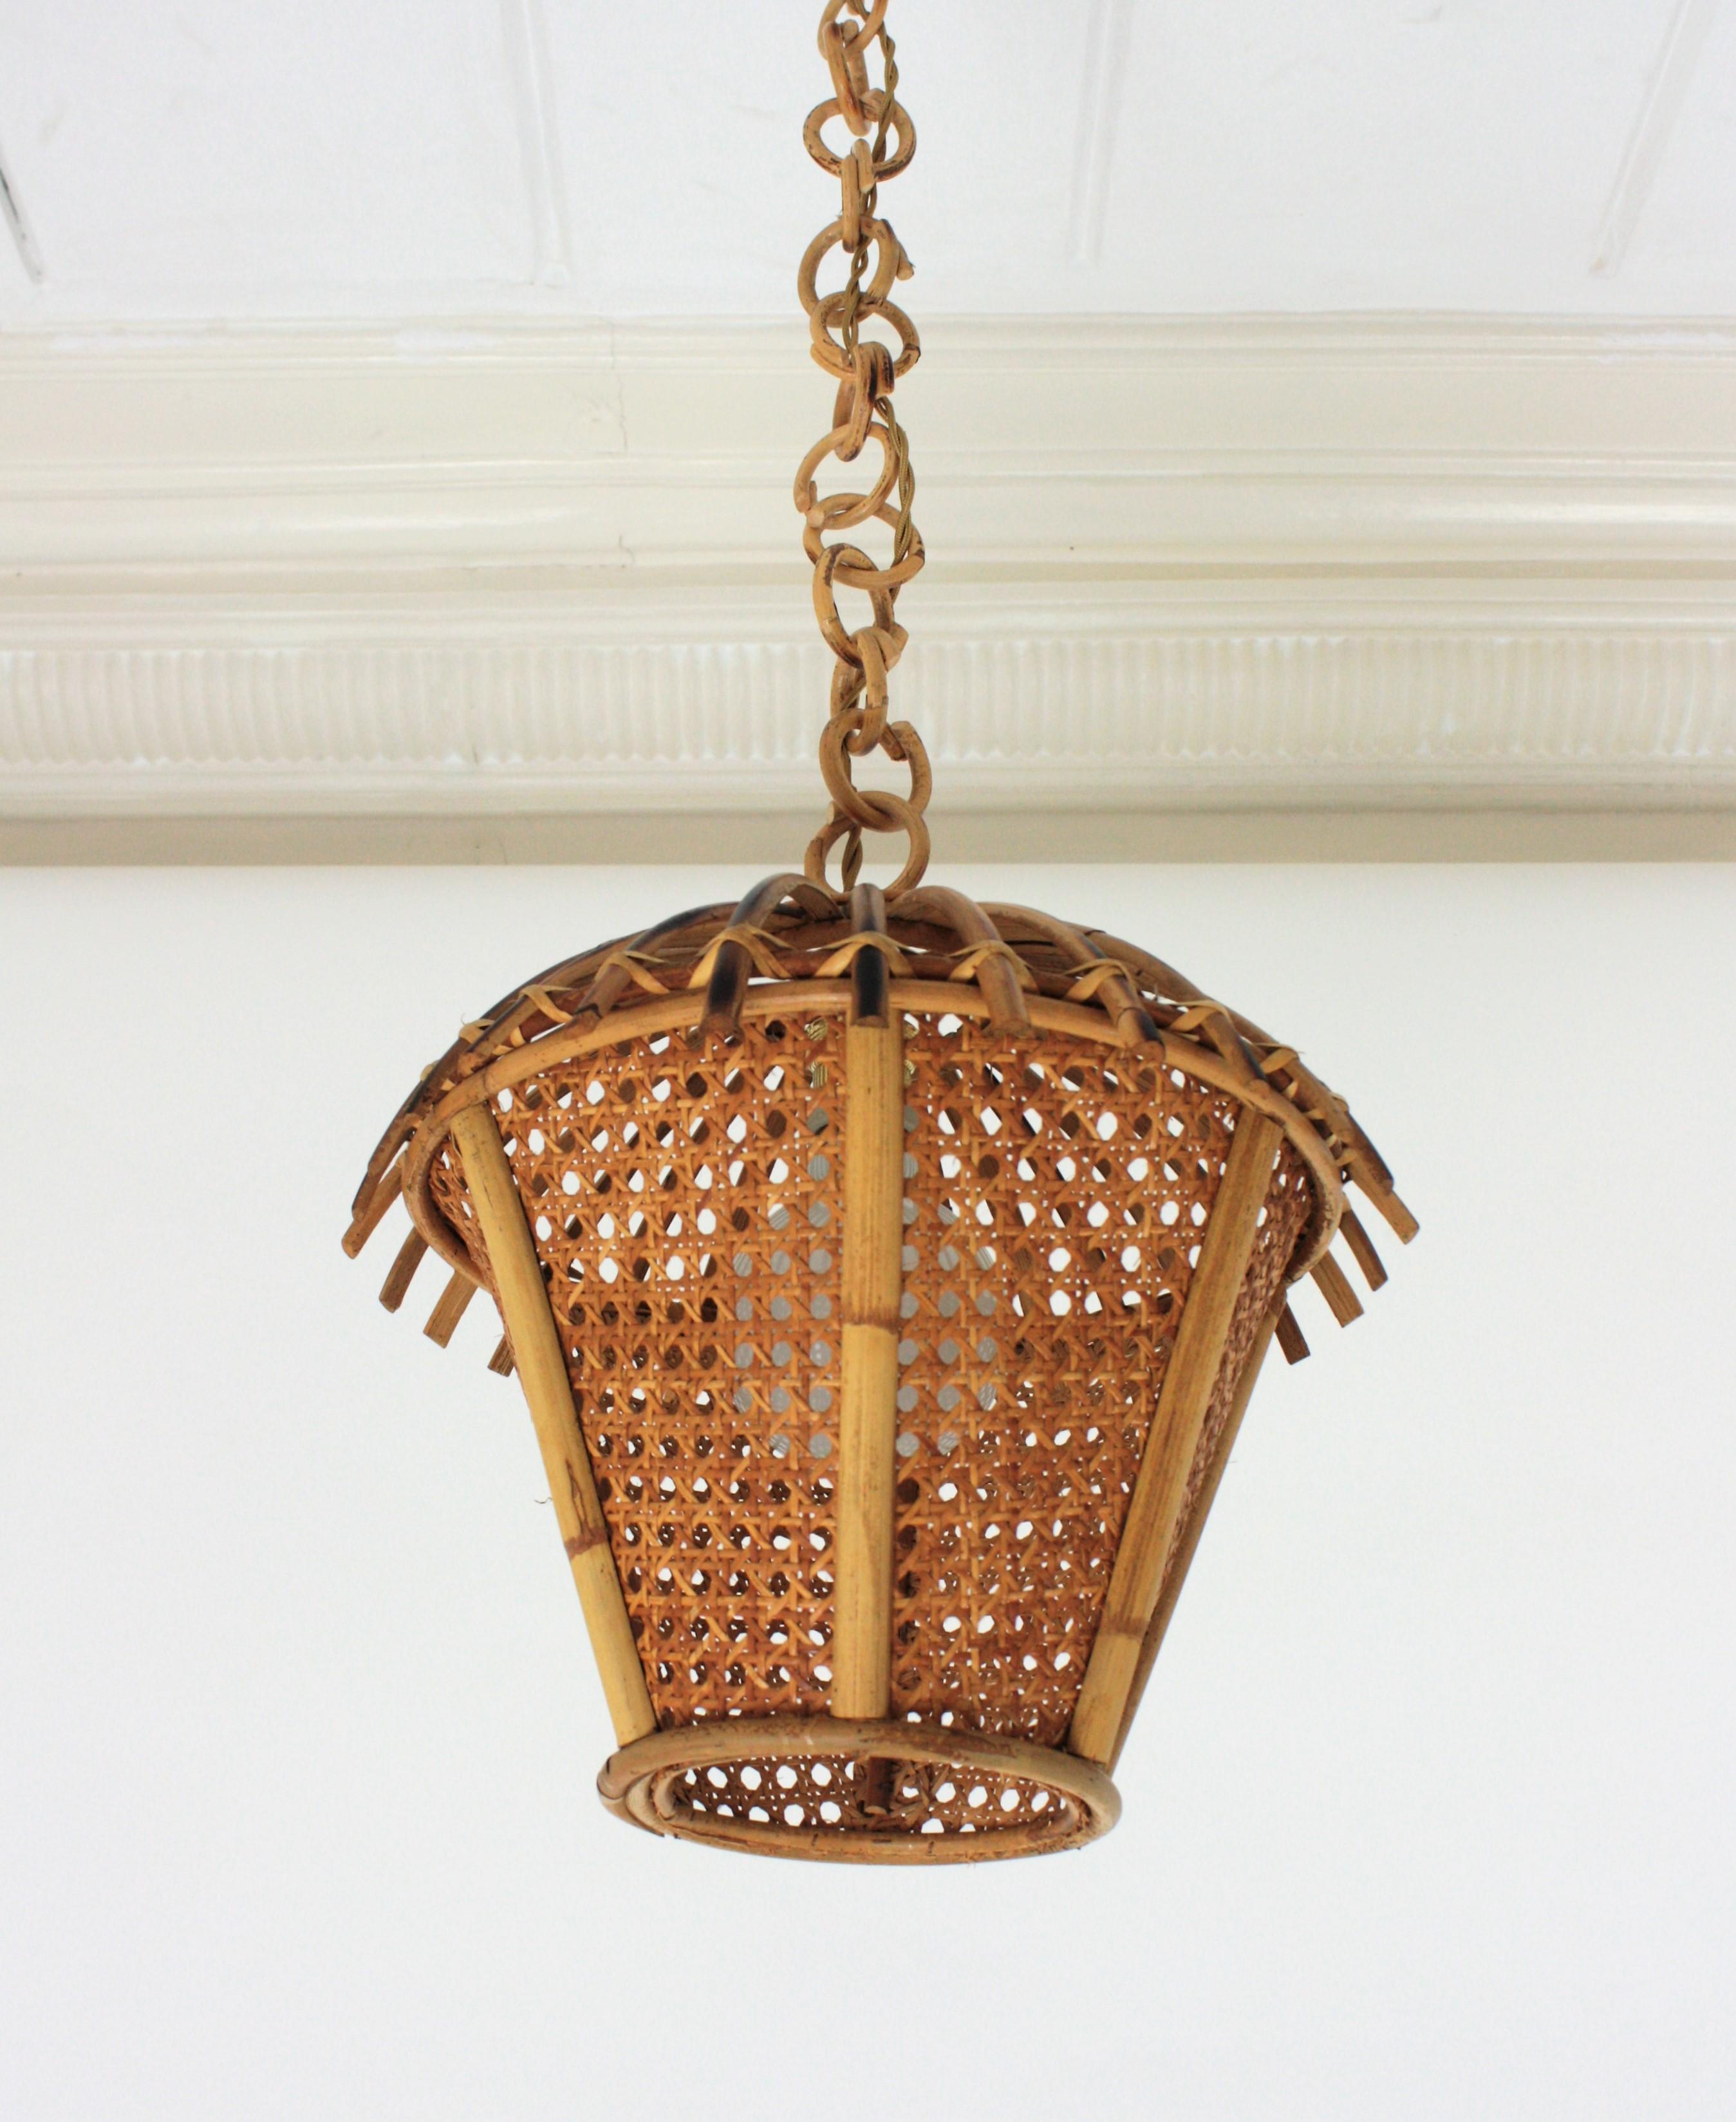 Italian Modernist Rattan and Wicker Wire Pagoda Pendant or Hanging Light, 1960s For Sale 2